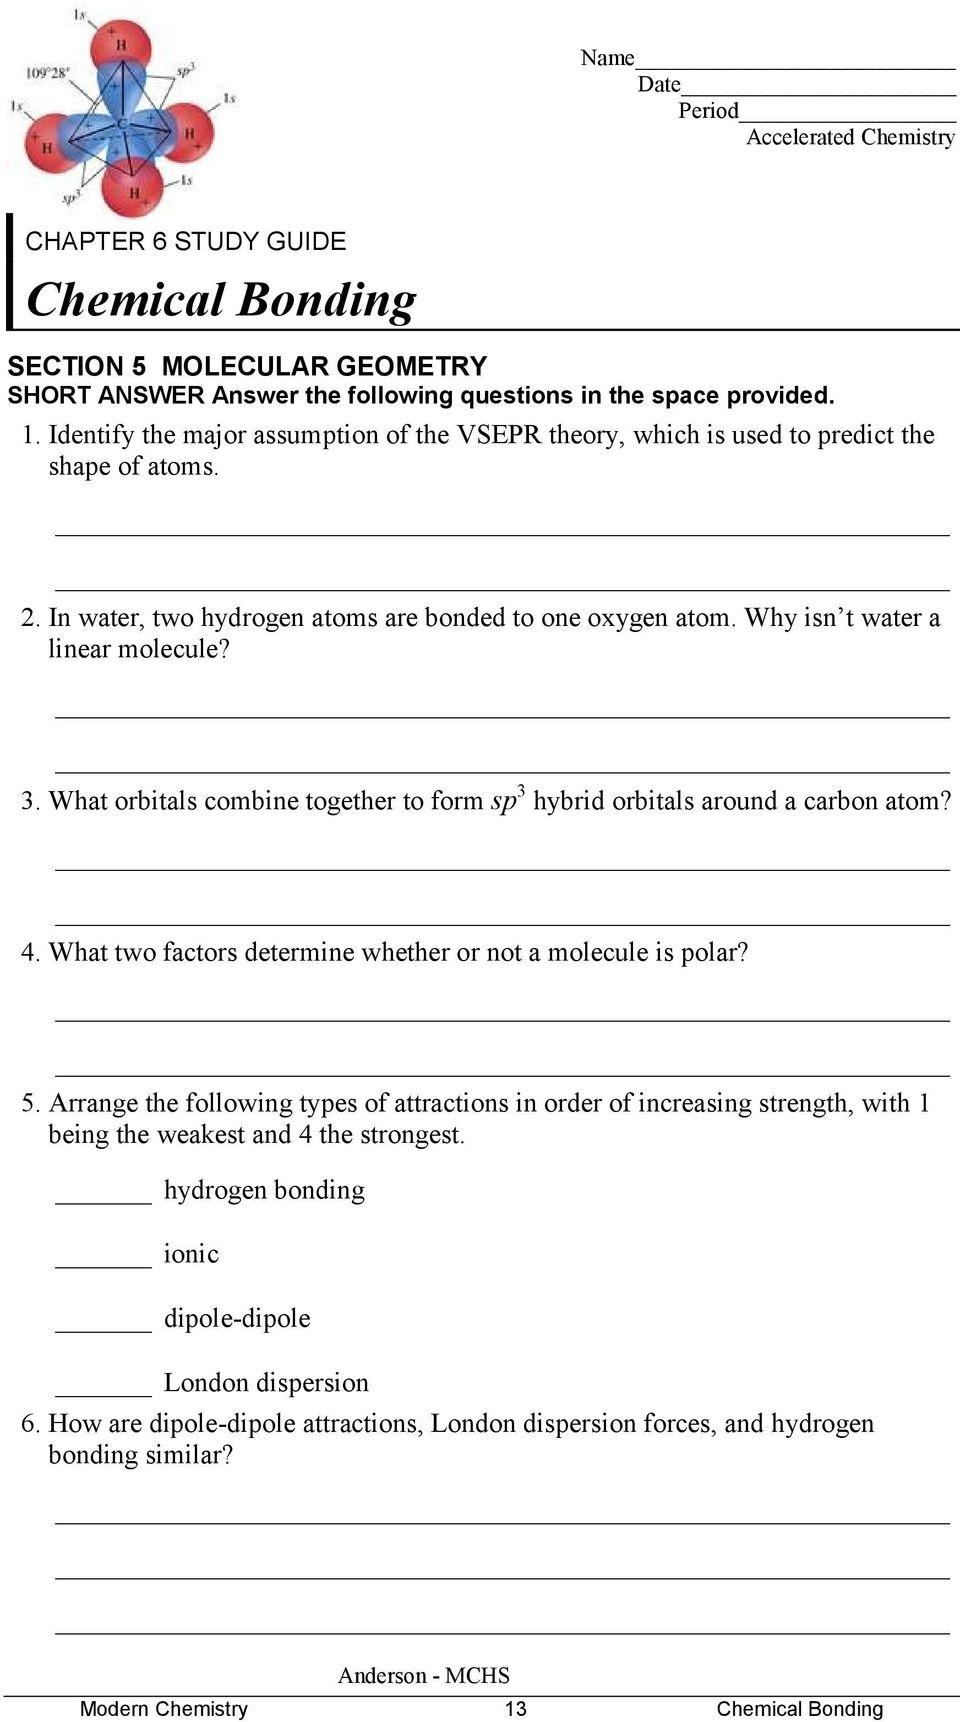 worksheet-chemical-bonding-ionic-and-covalent-answers-db-excel